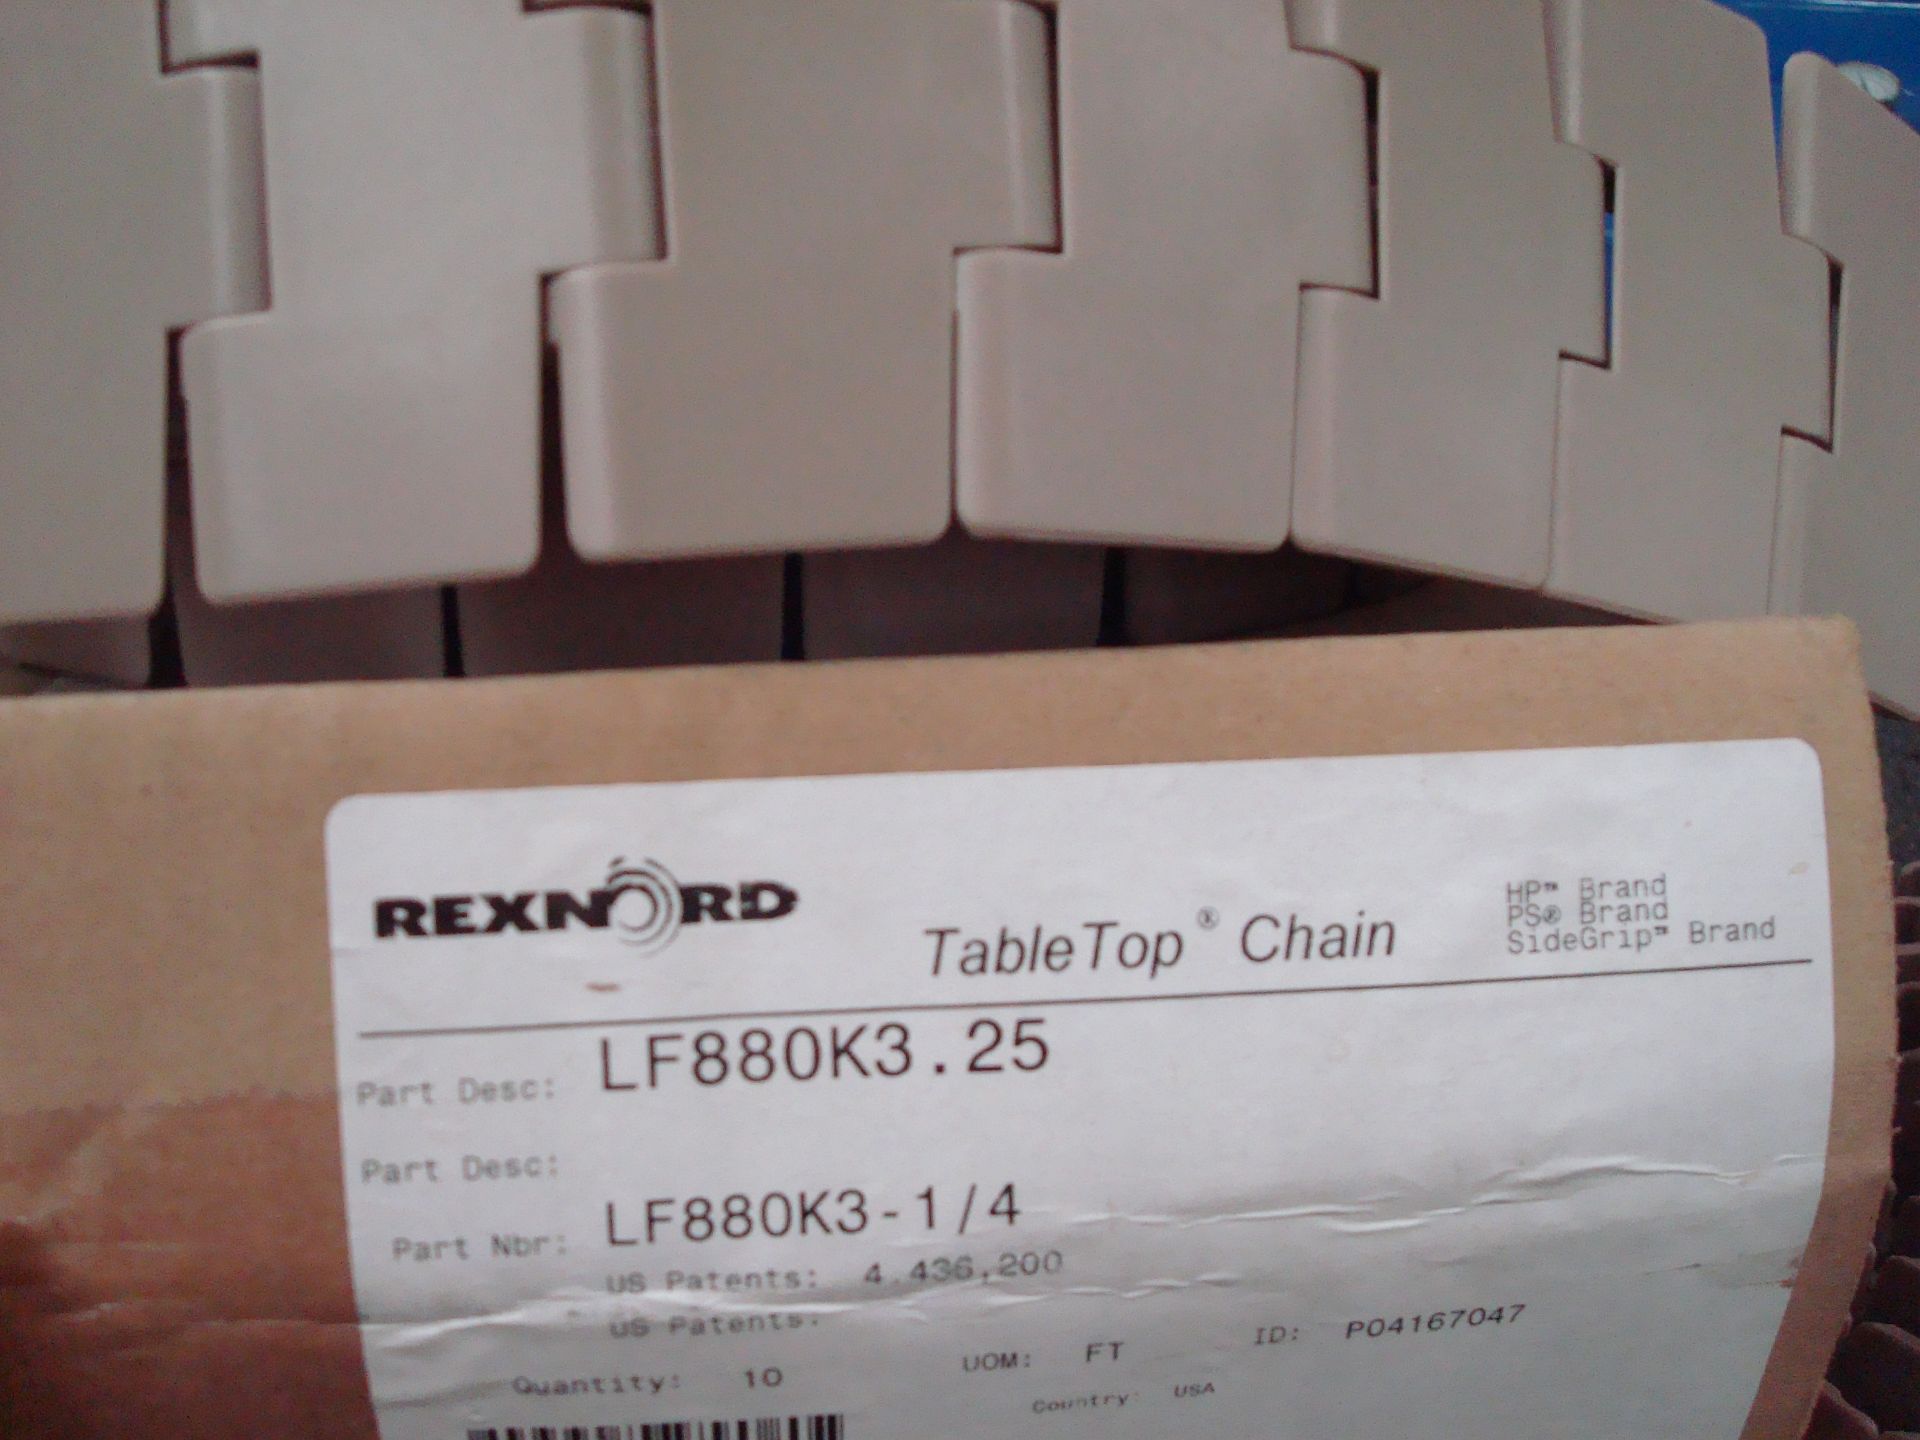 LF880K 3.25 REXNORD & MARBETT TABLE TOP CHAIN - Image 12 of 12